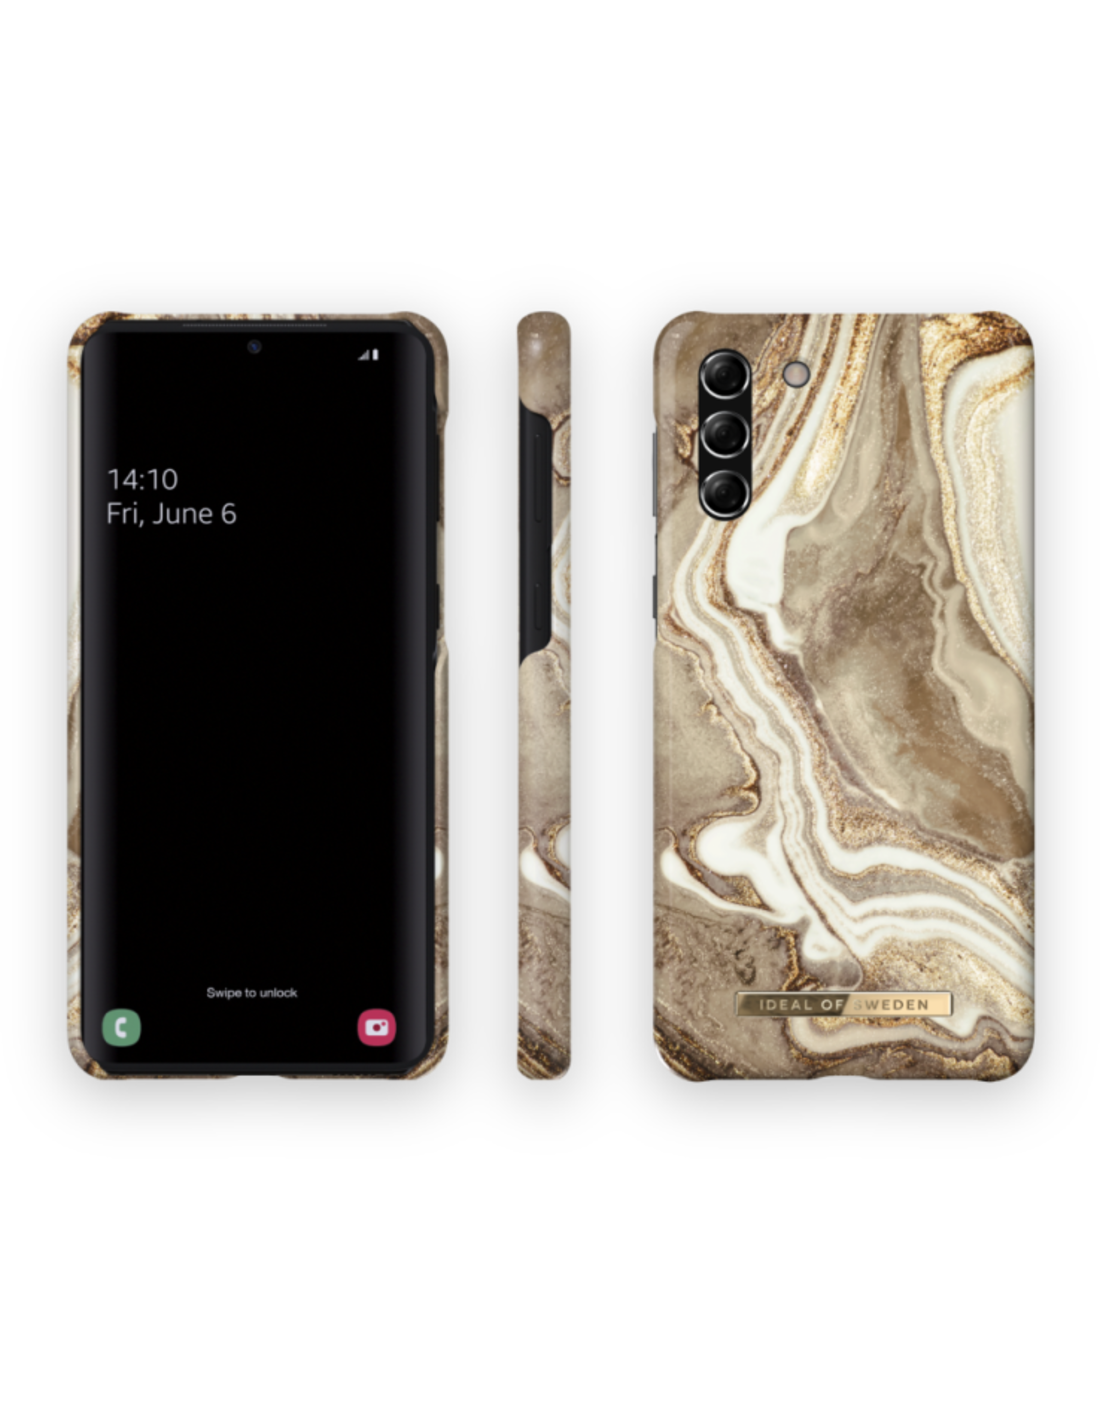 OF Sand Backcover, Marble Golden Samsung, IDFCGM19-S21-164, Galaxy IDEAL SWEDEN S21,